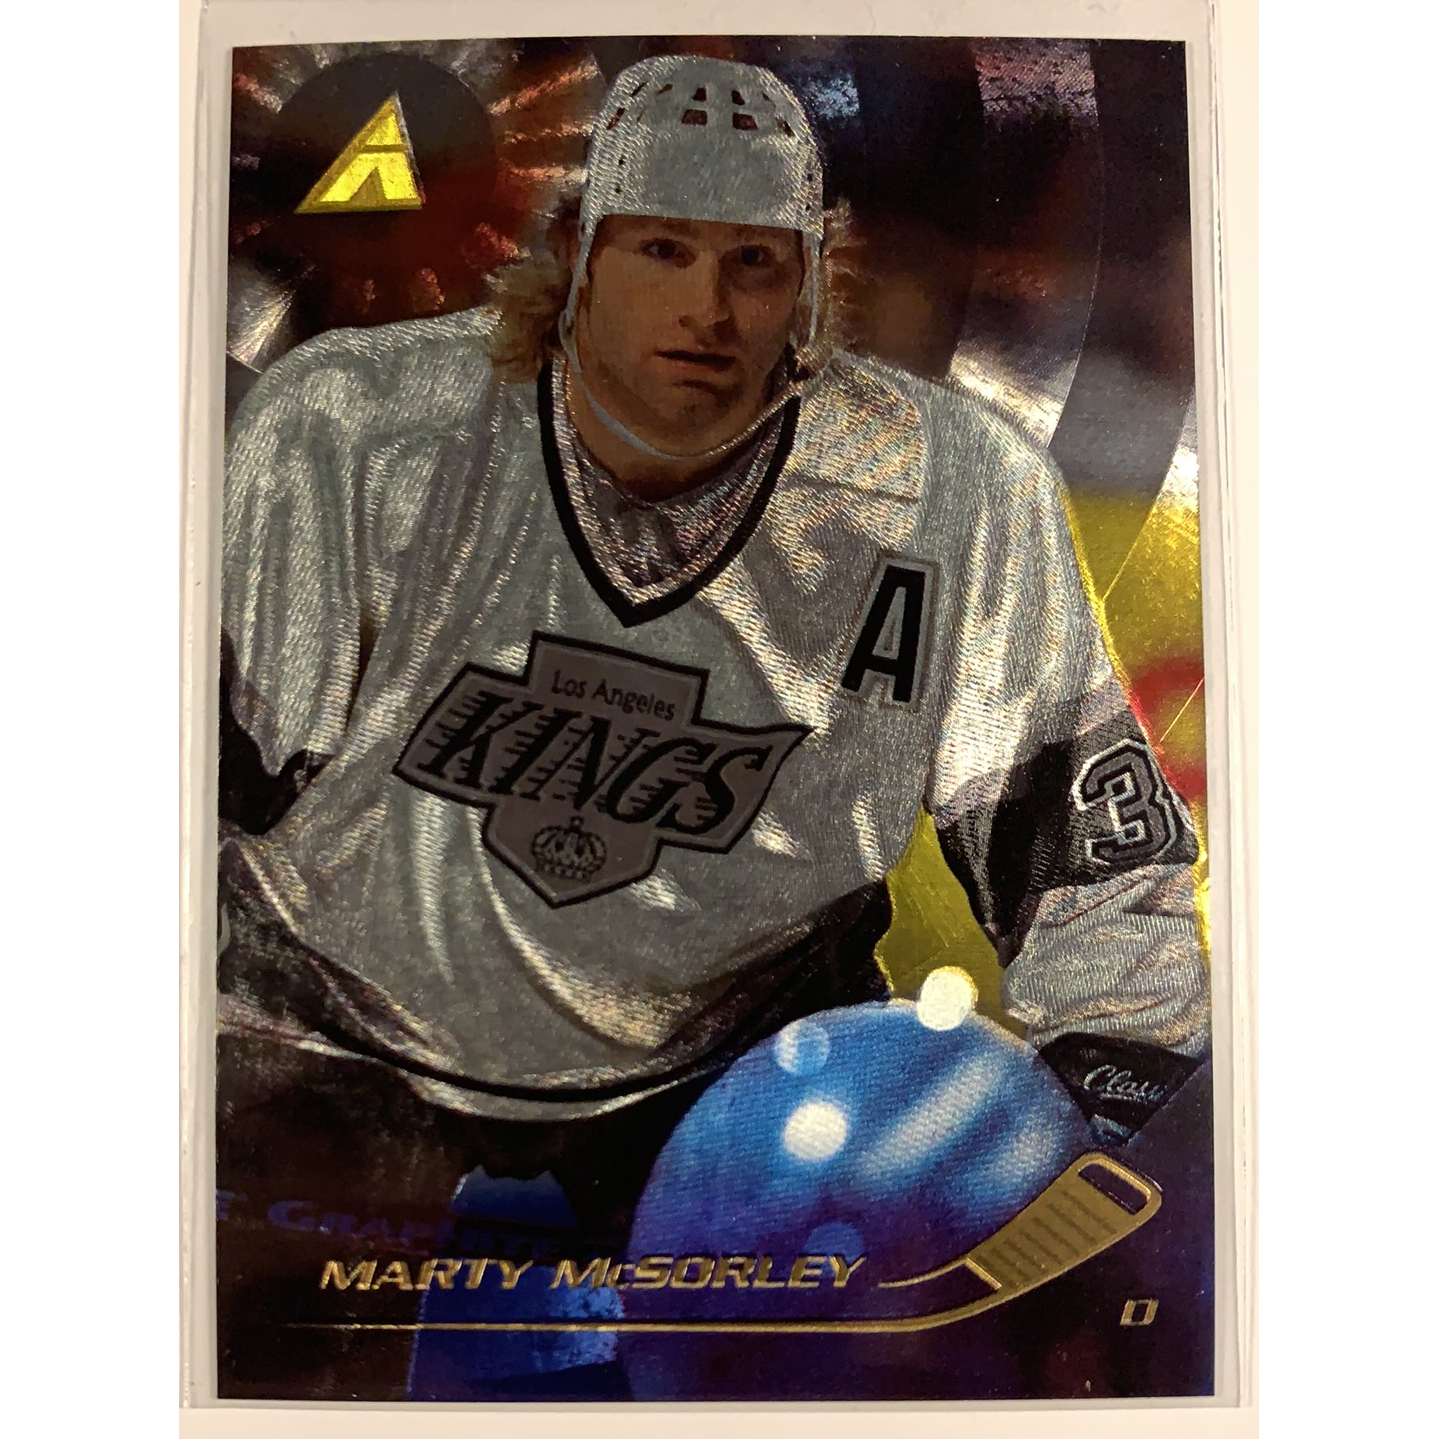 Marty McSorley Autographed Memorabilia  Signed Photo, Jersey, Collectibles  & Merchandise